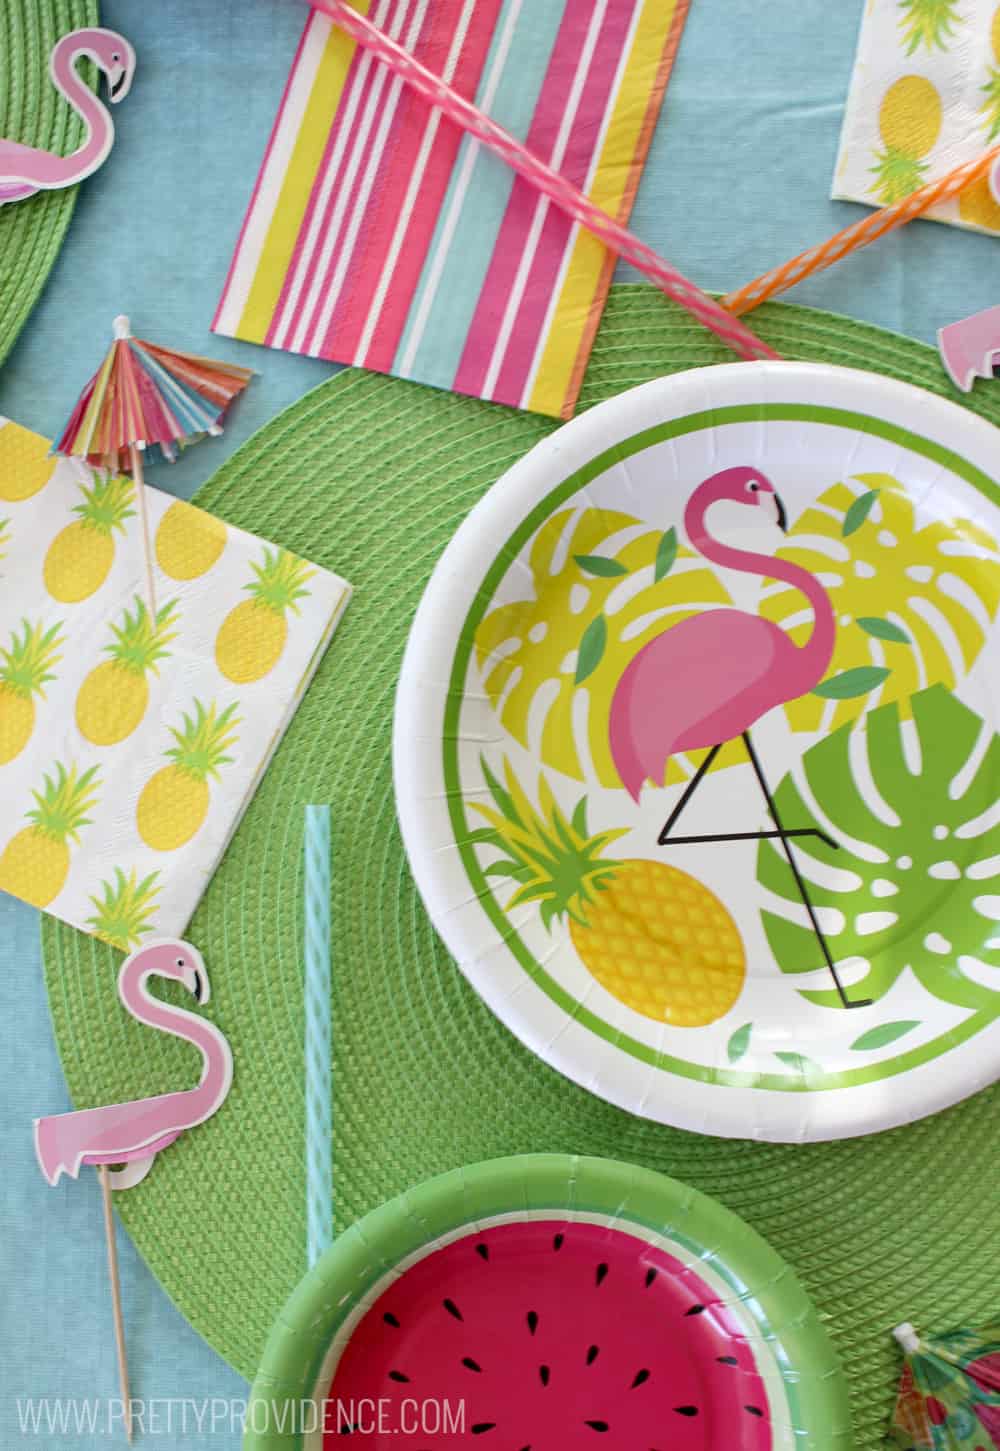 How amazing are these fun summer party items from Michaels?! I'm obsessed!